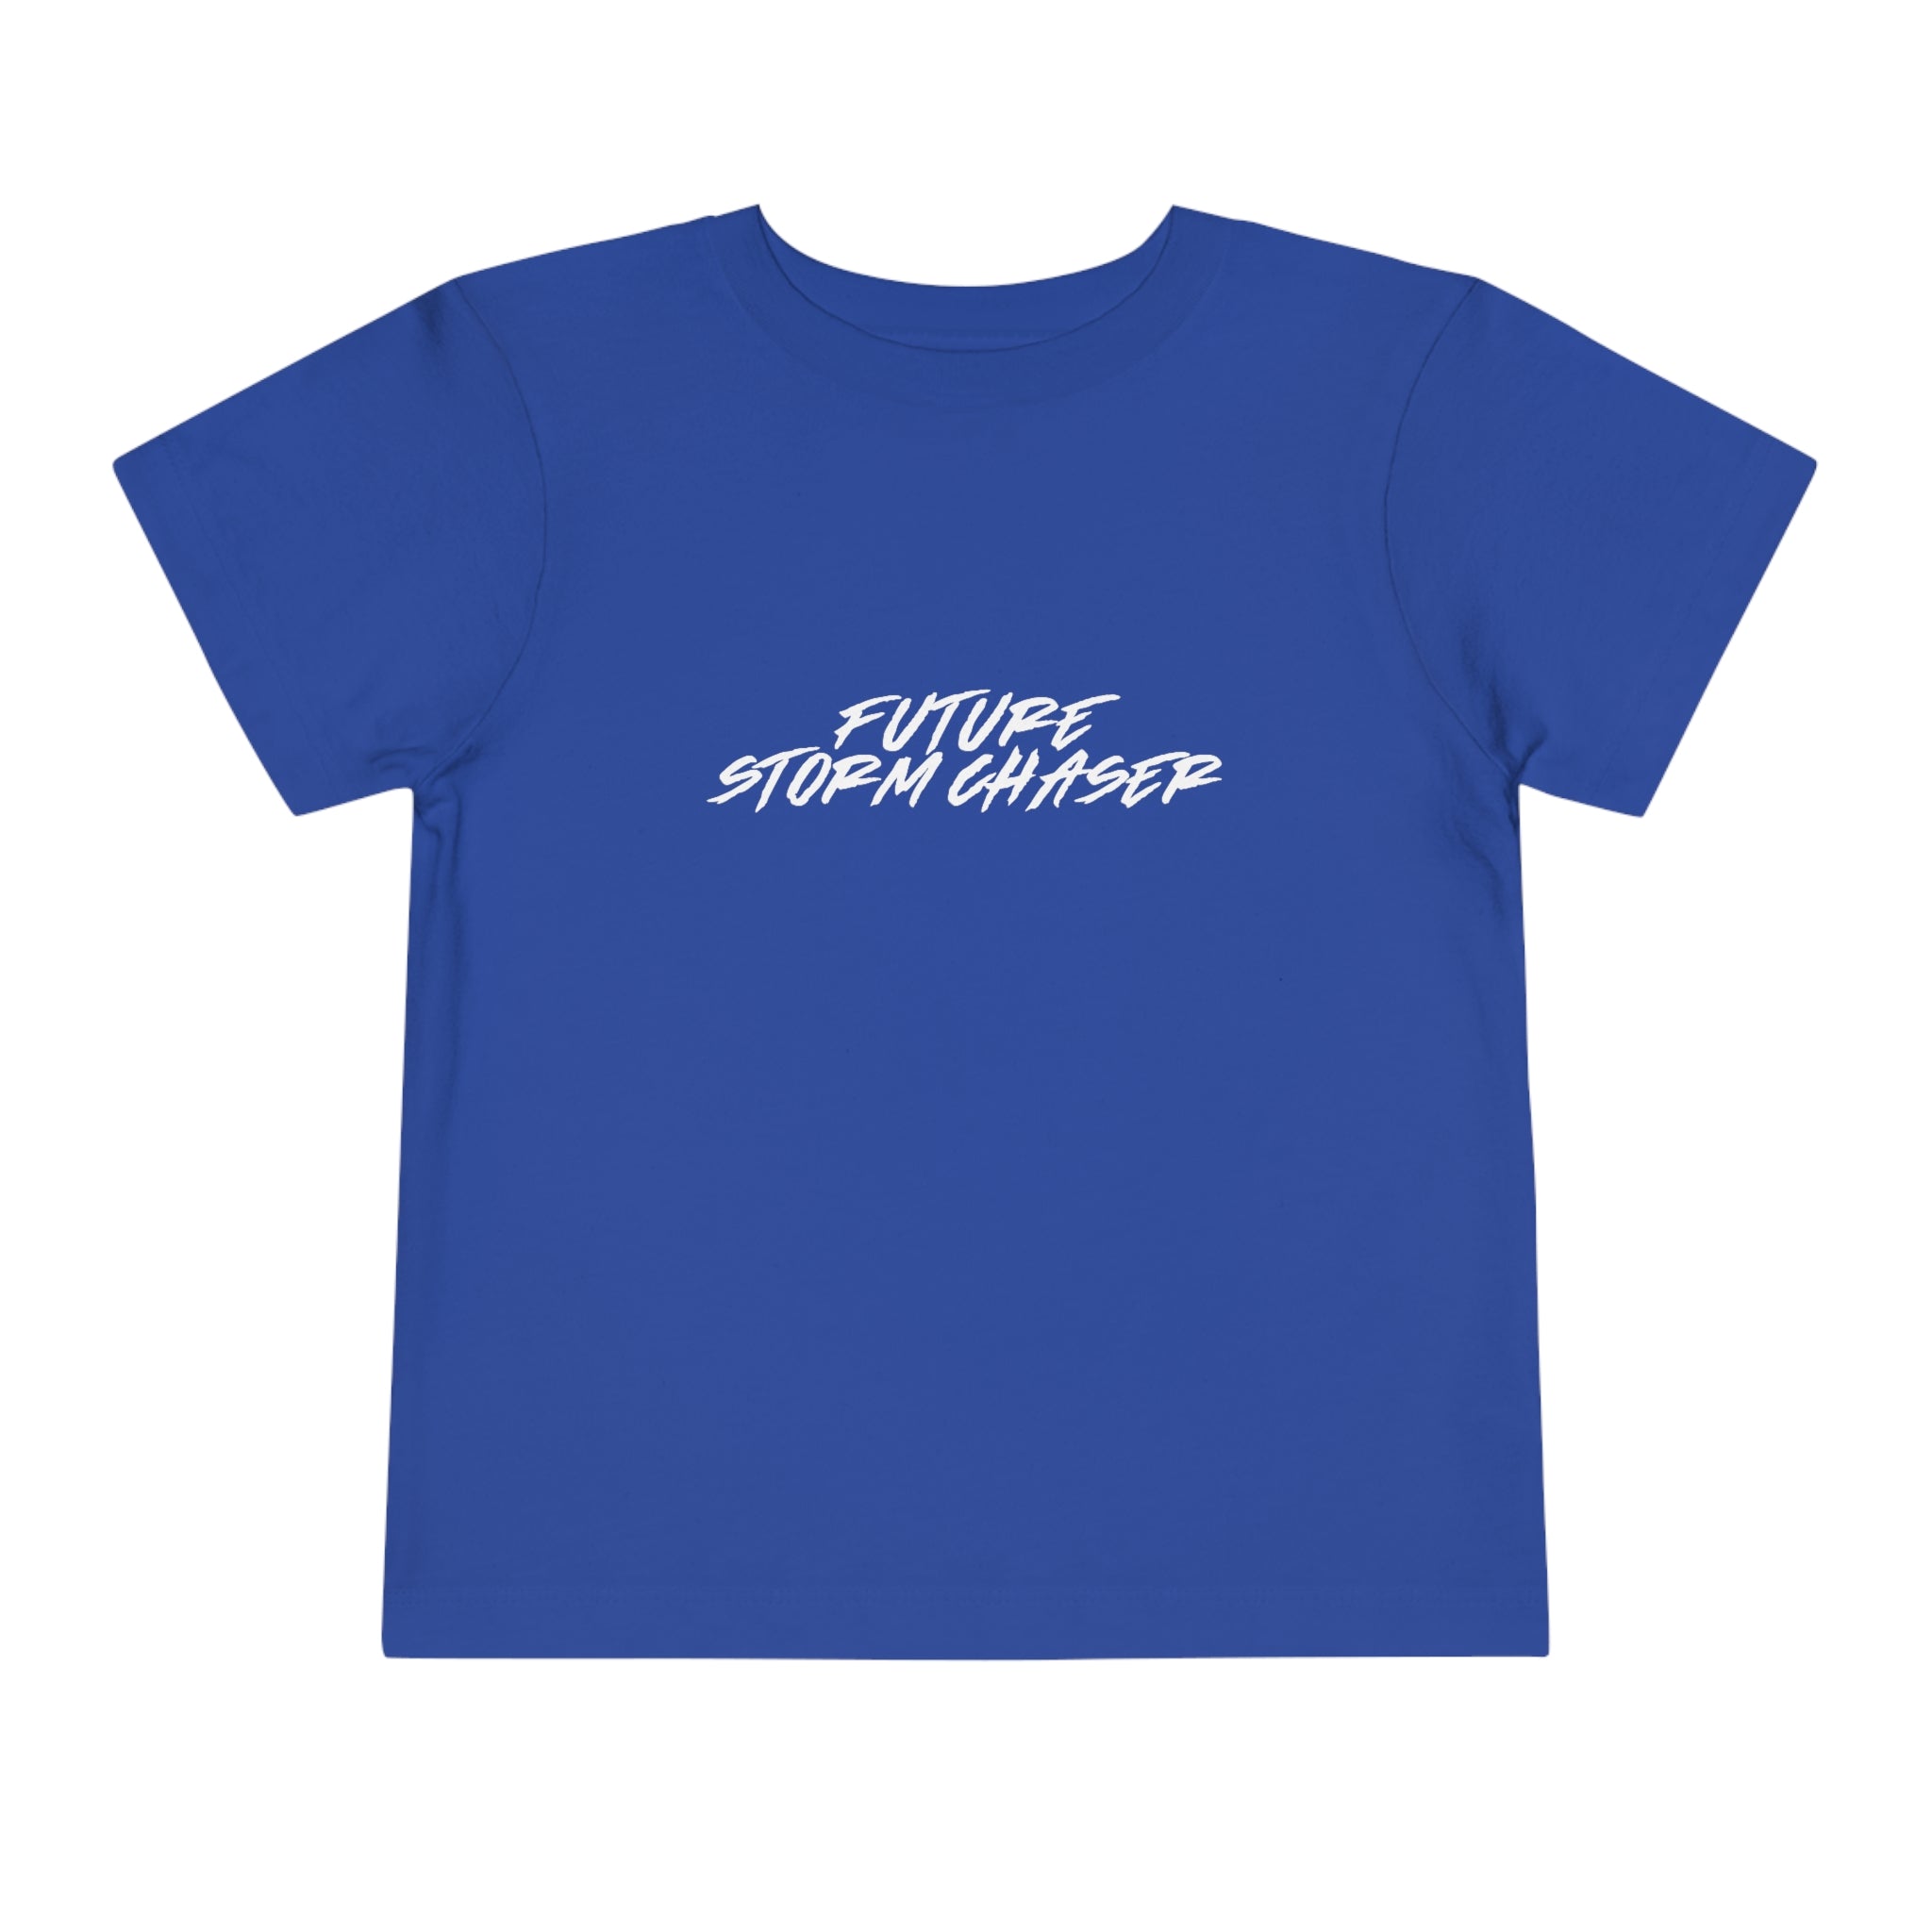 Future Storm Chaser Toddler Tee 